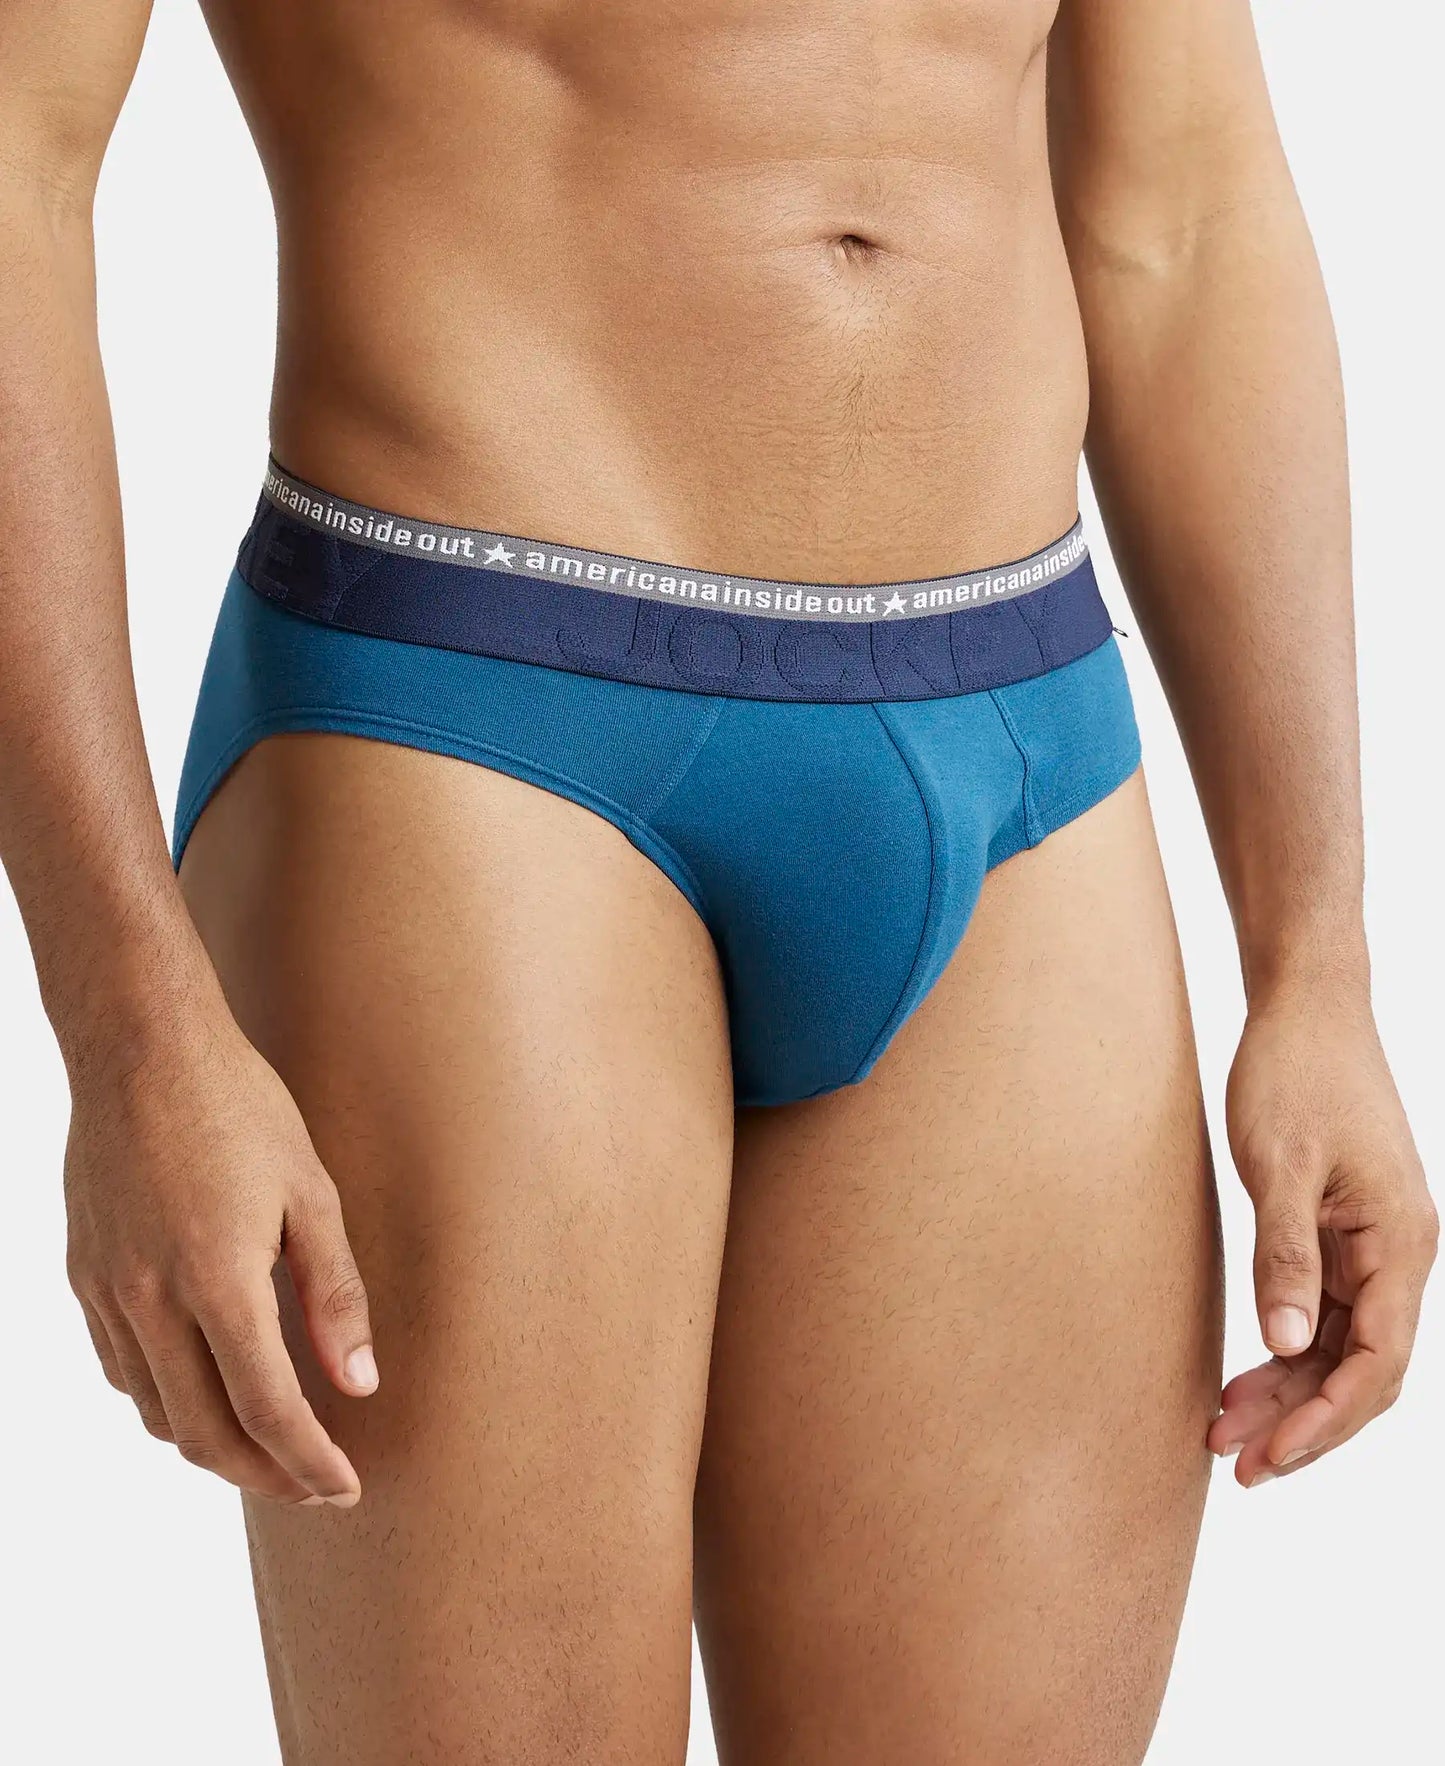 Super Combed Cotton Elastane Solid Brief with Ultrasoft Waistband - Seaport Teal-3